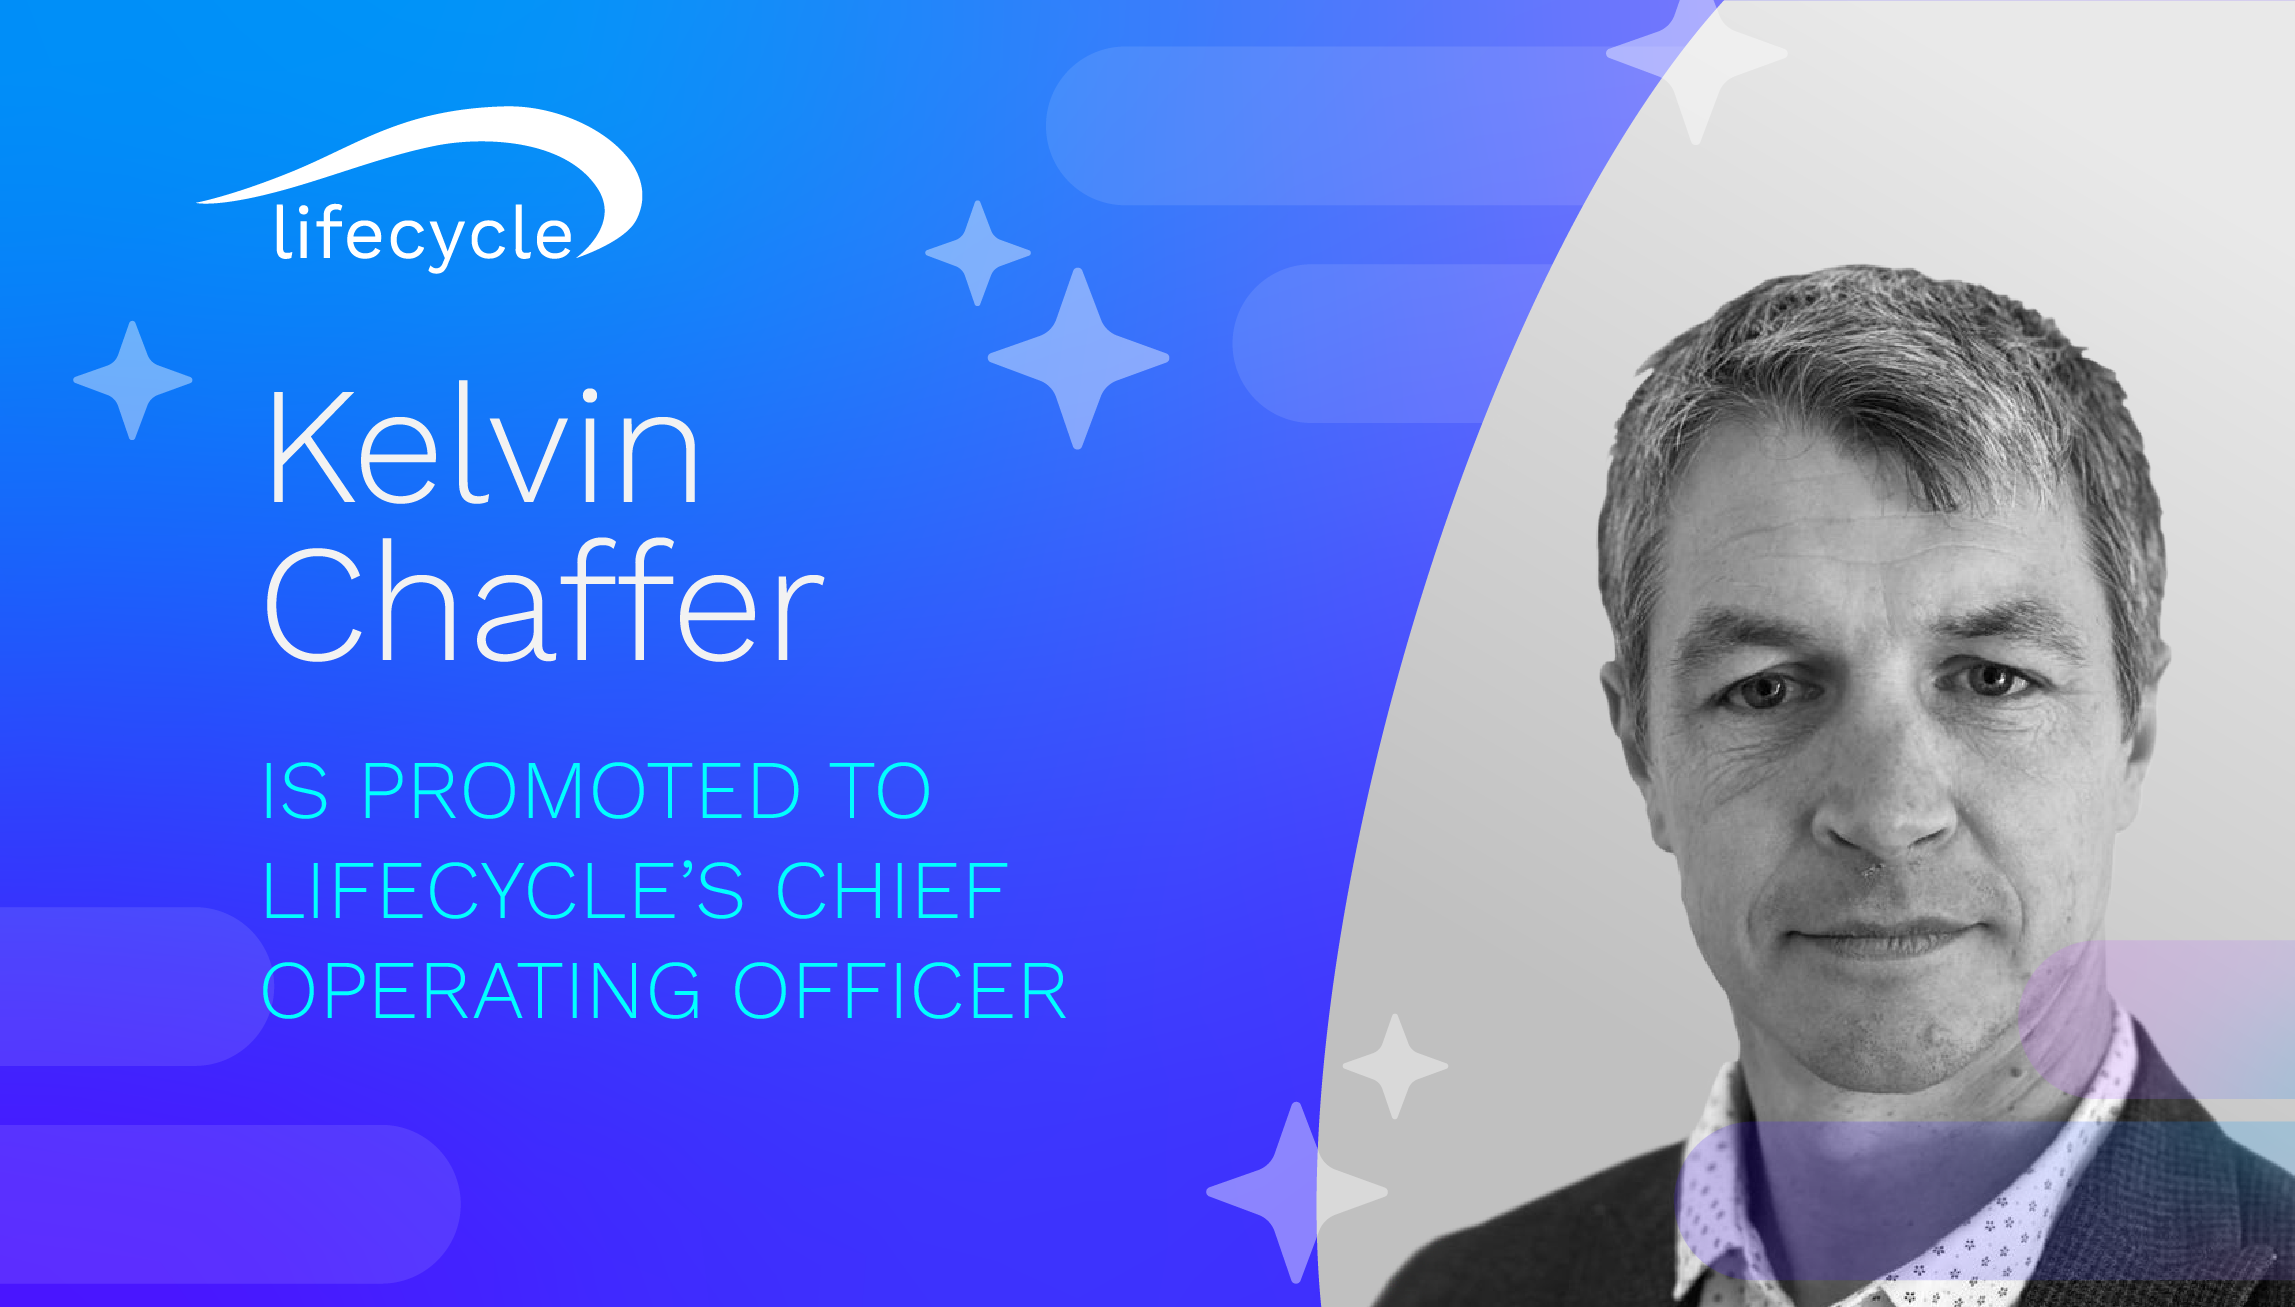 Lifecycle promotes Kelvin Chaffer as Chief Operating Officer!